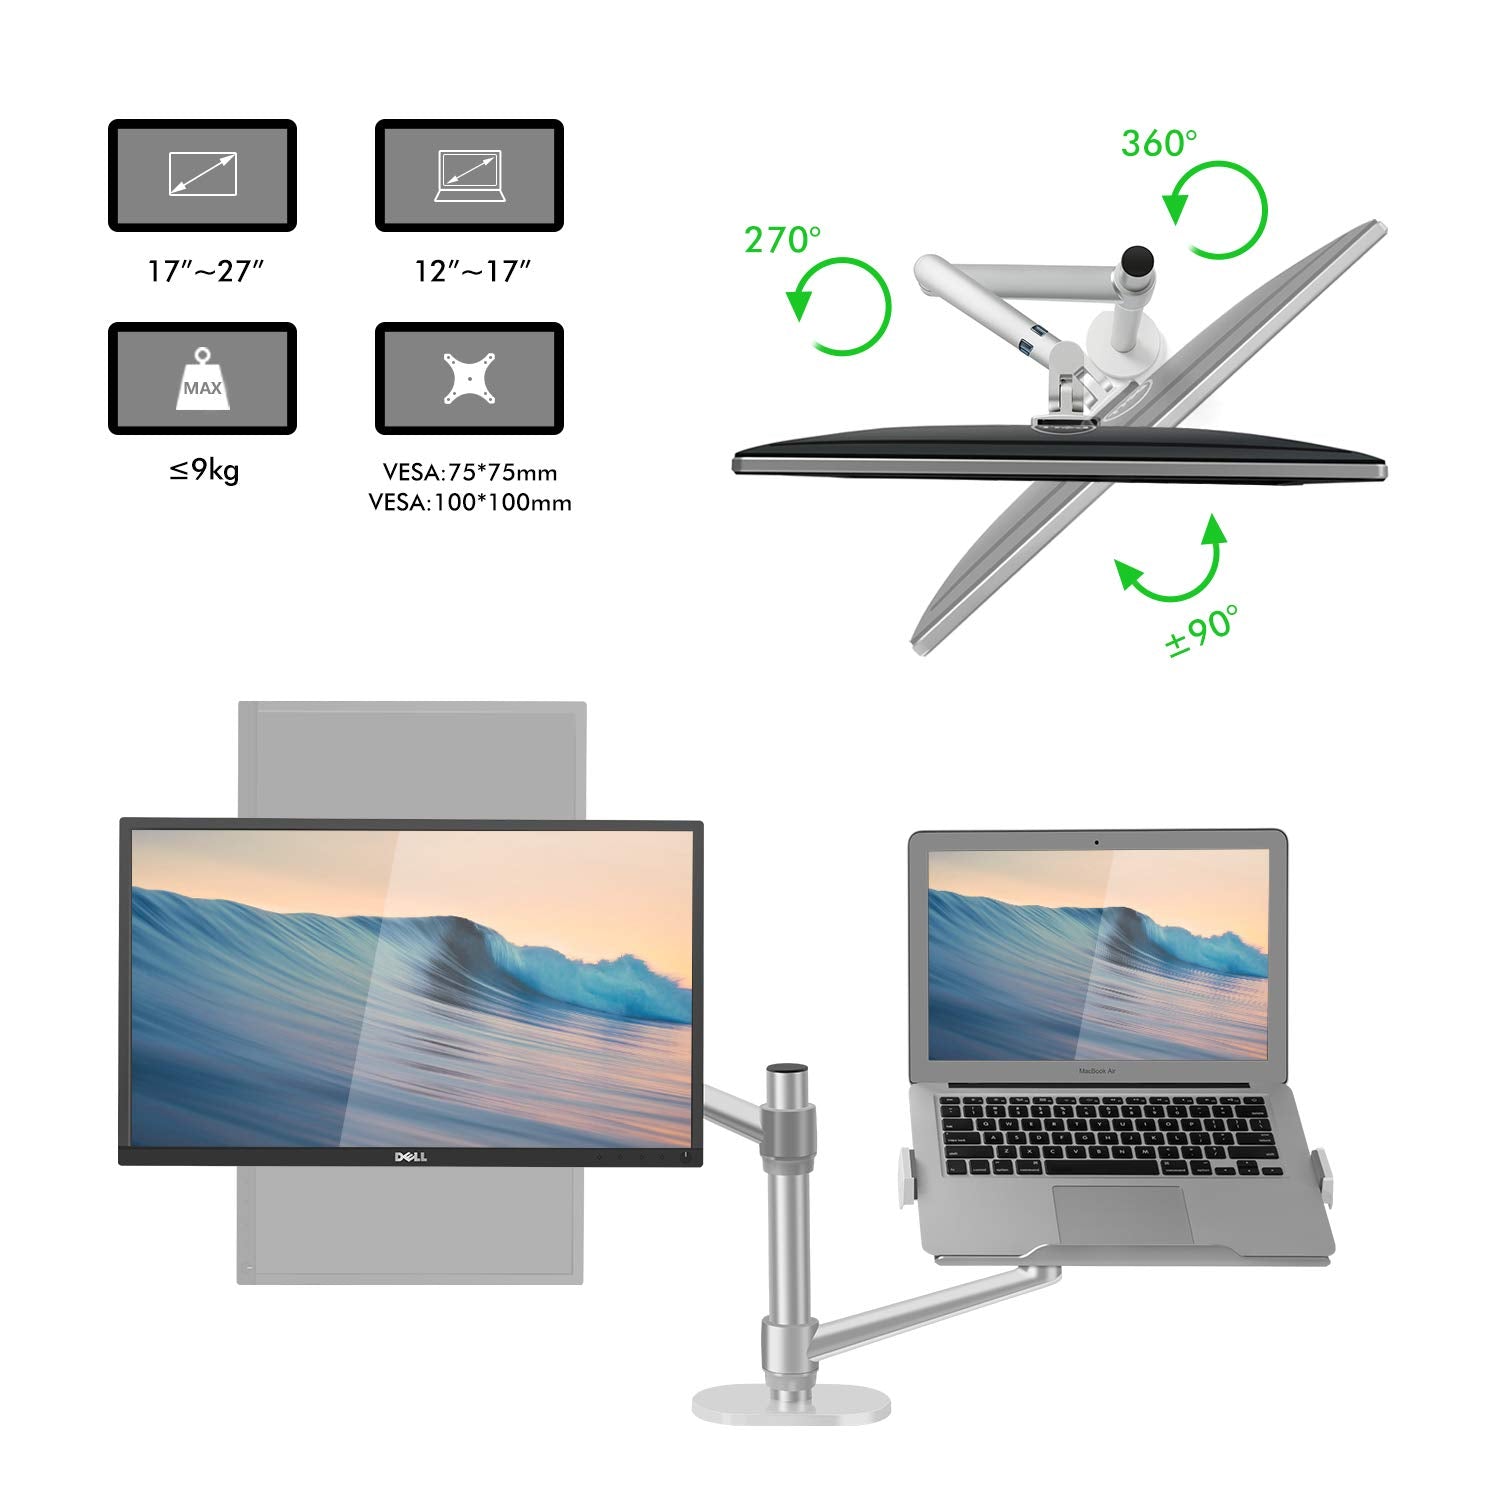 Aeons Monitor and Laptop Tray Desk Mount, 2-in-1 Adjustable Dual Arm fits 27 inch Screen with VESA, Clamp and Cable Management, Silver